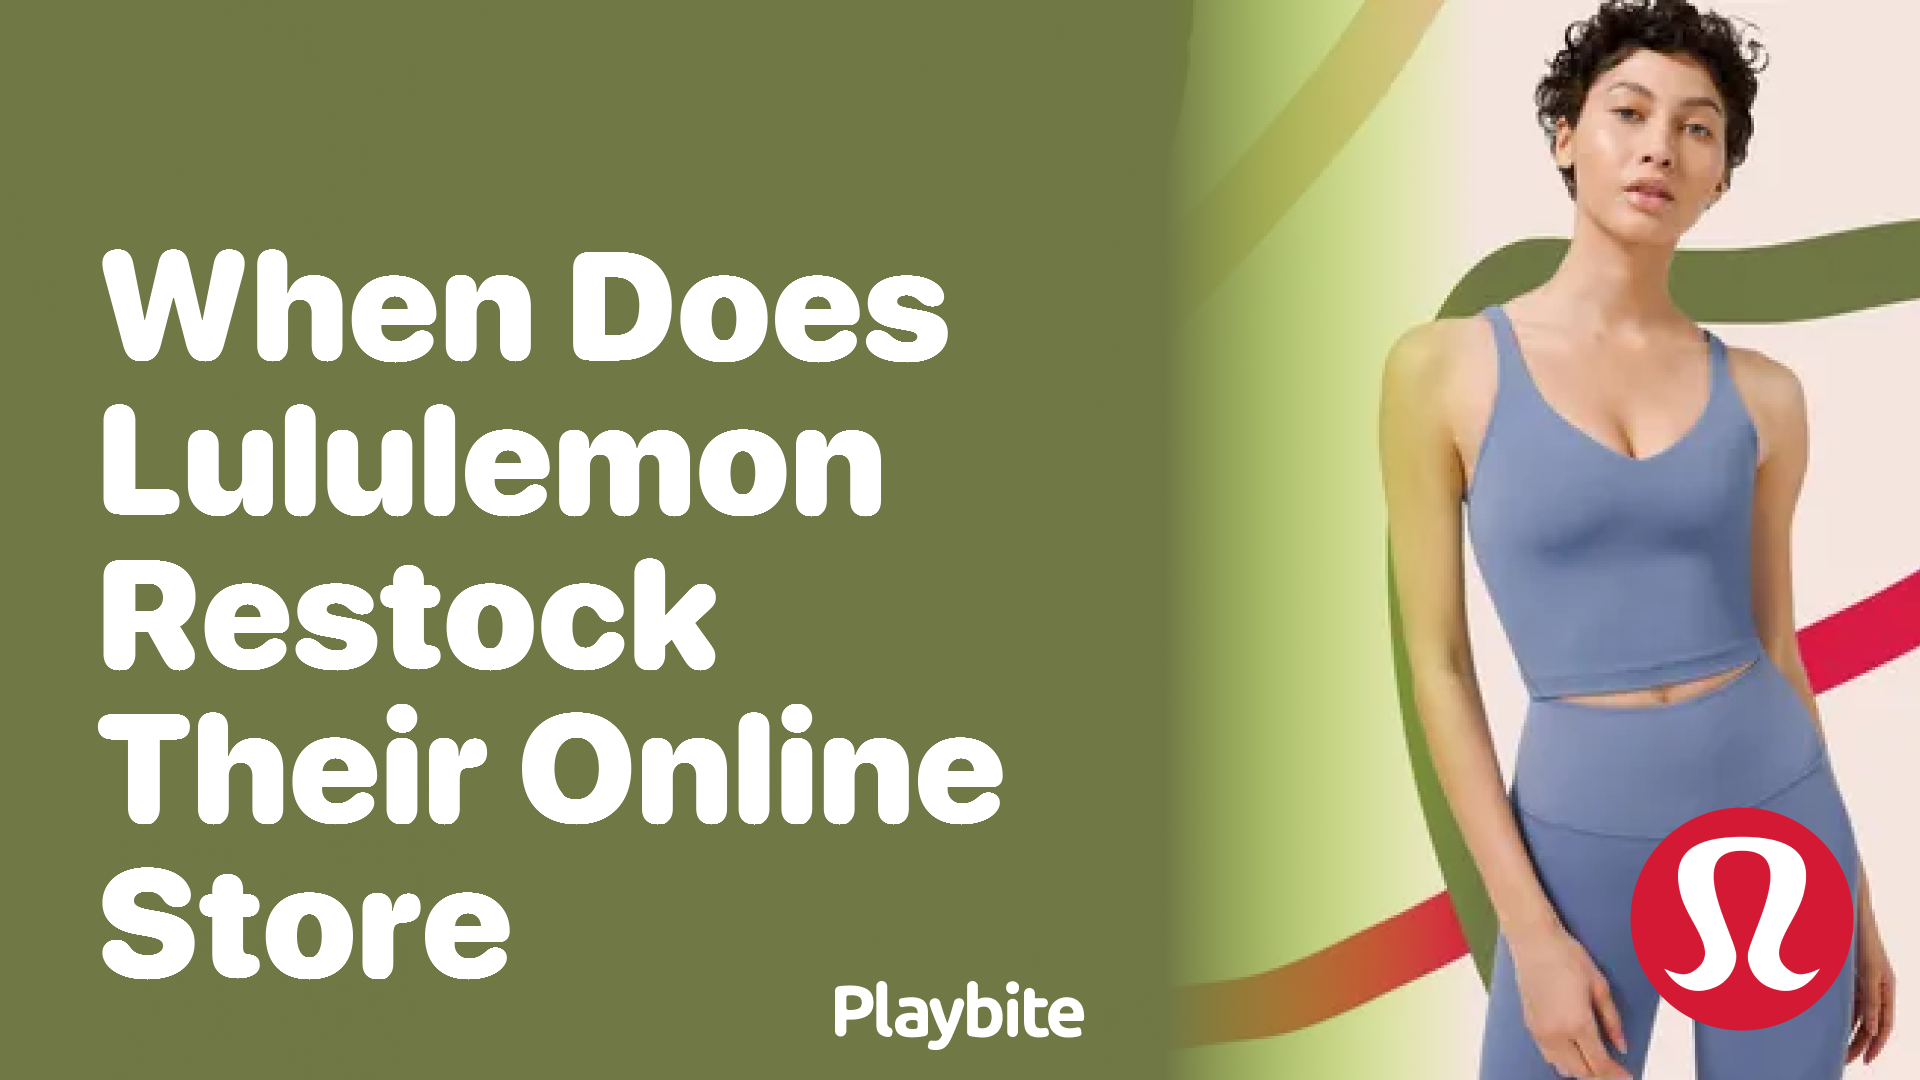 When Does Lululemon Restock Online 'We Made Too Much' Items? - Playbite